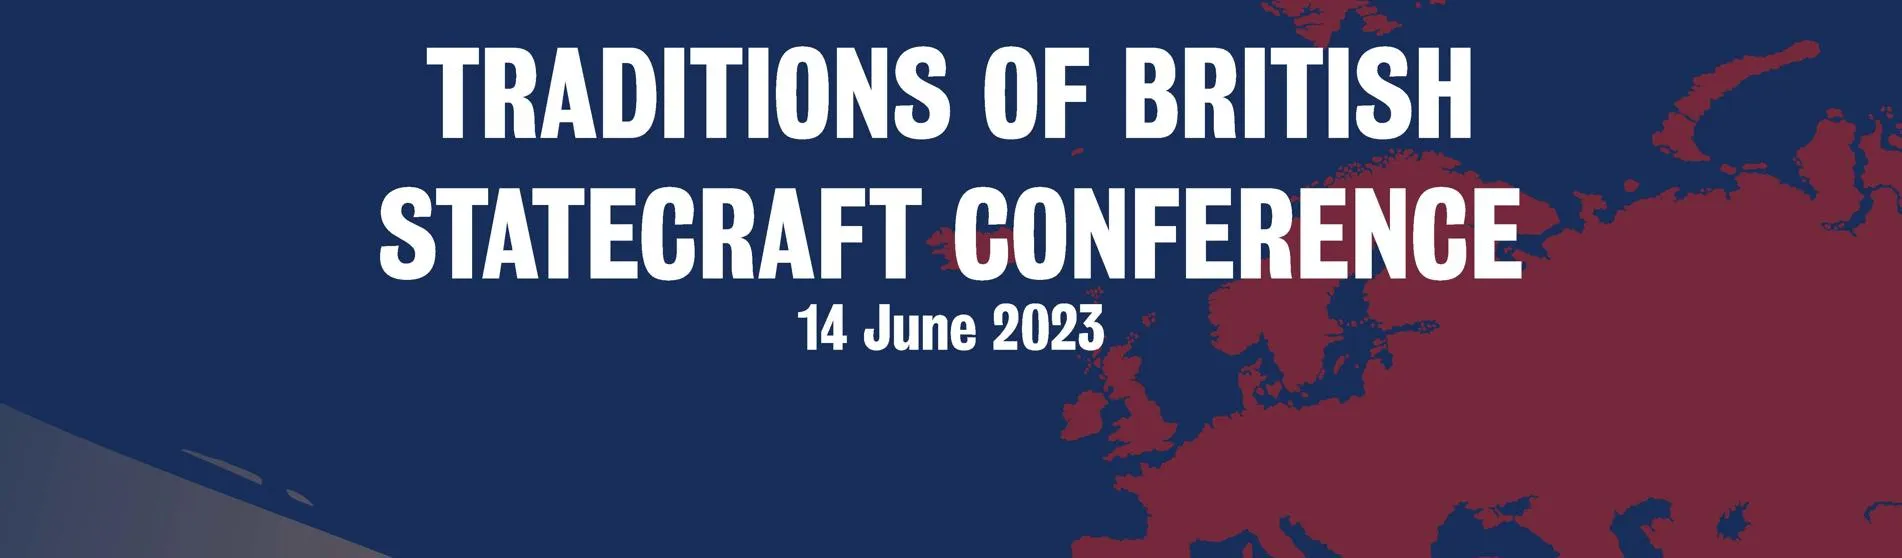 Statecraft Conference 2023